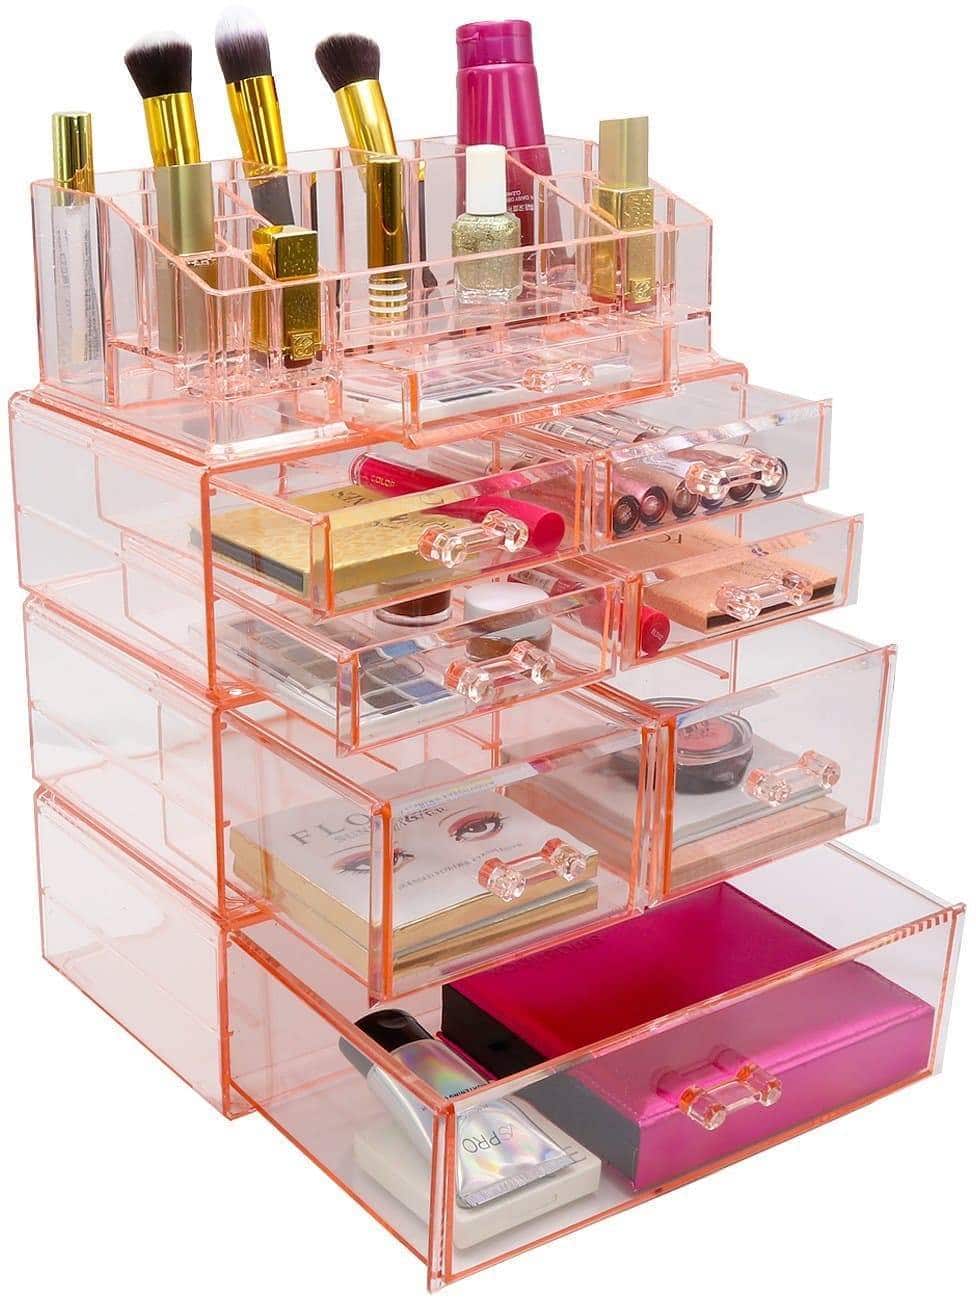 Related sorbus acrylic cosmetics makeup and jewelry storage case display sets interlocking drawers to create your own specially designed makeup counter stackable and interchangeable pink 1